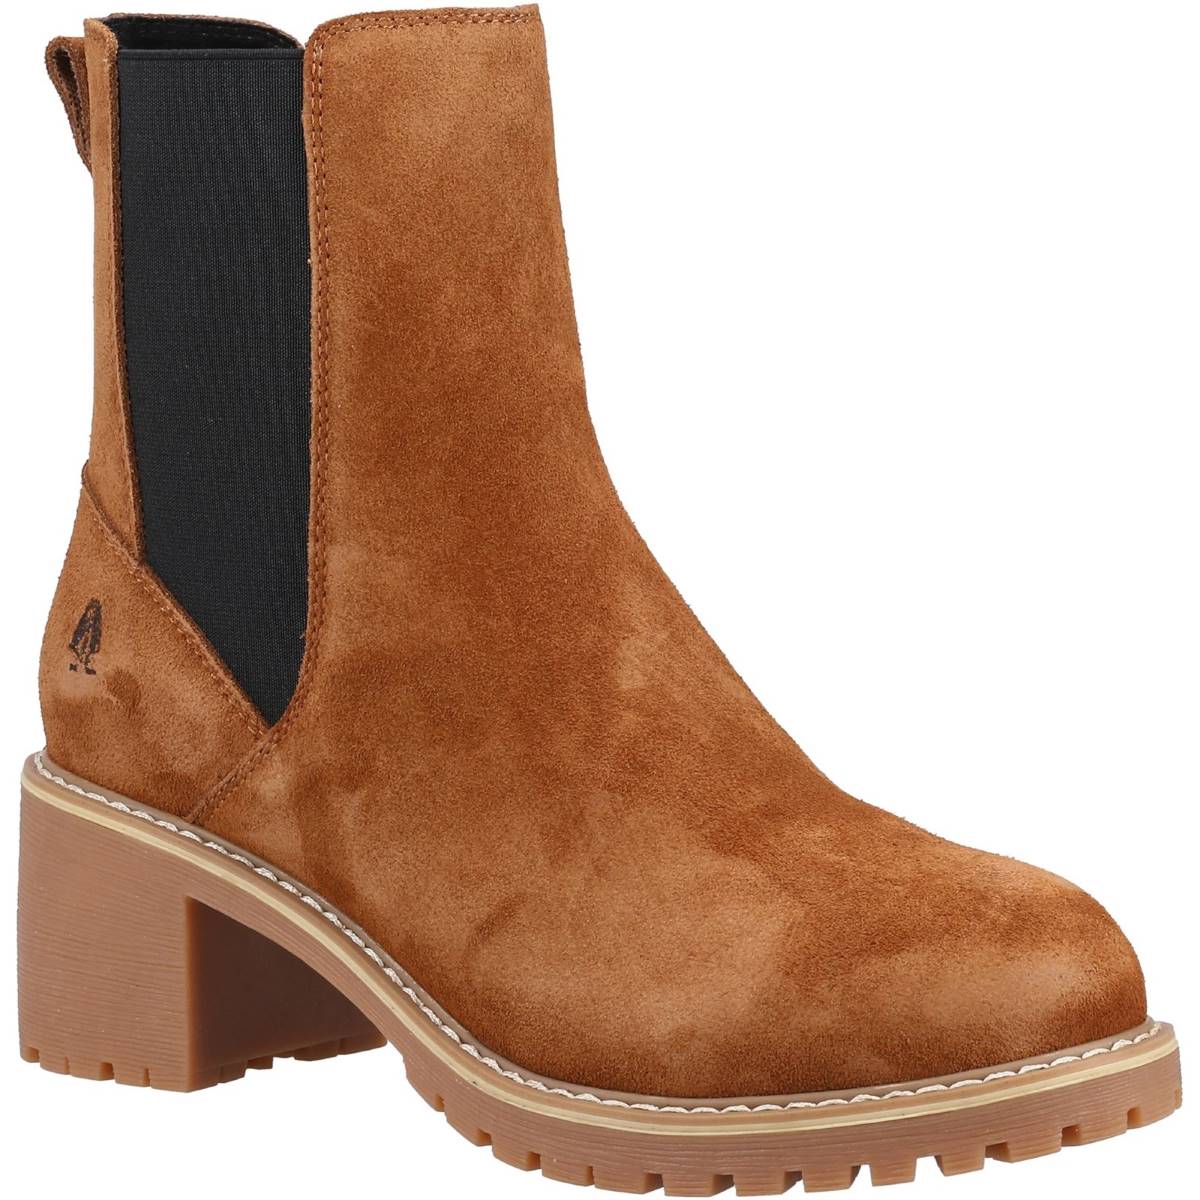 Hush Puppies Freda Chelsea Tan Womens ankle boots HP-37859-70548 in a Plain Leather in Size 3